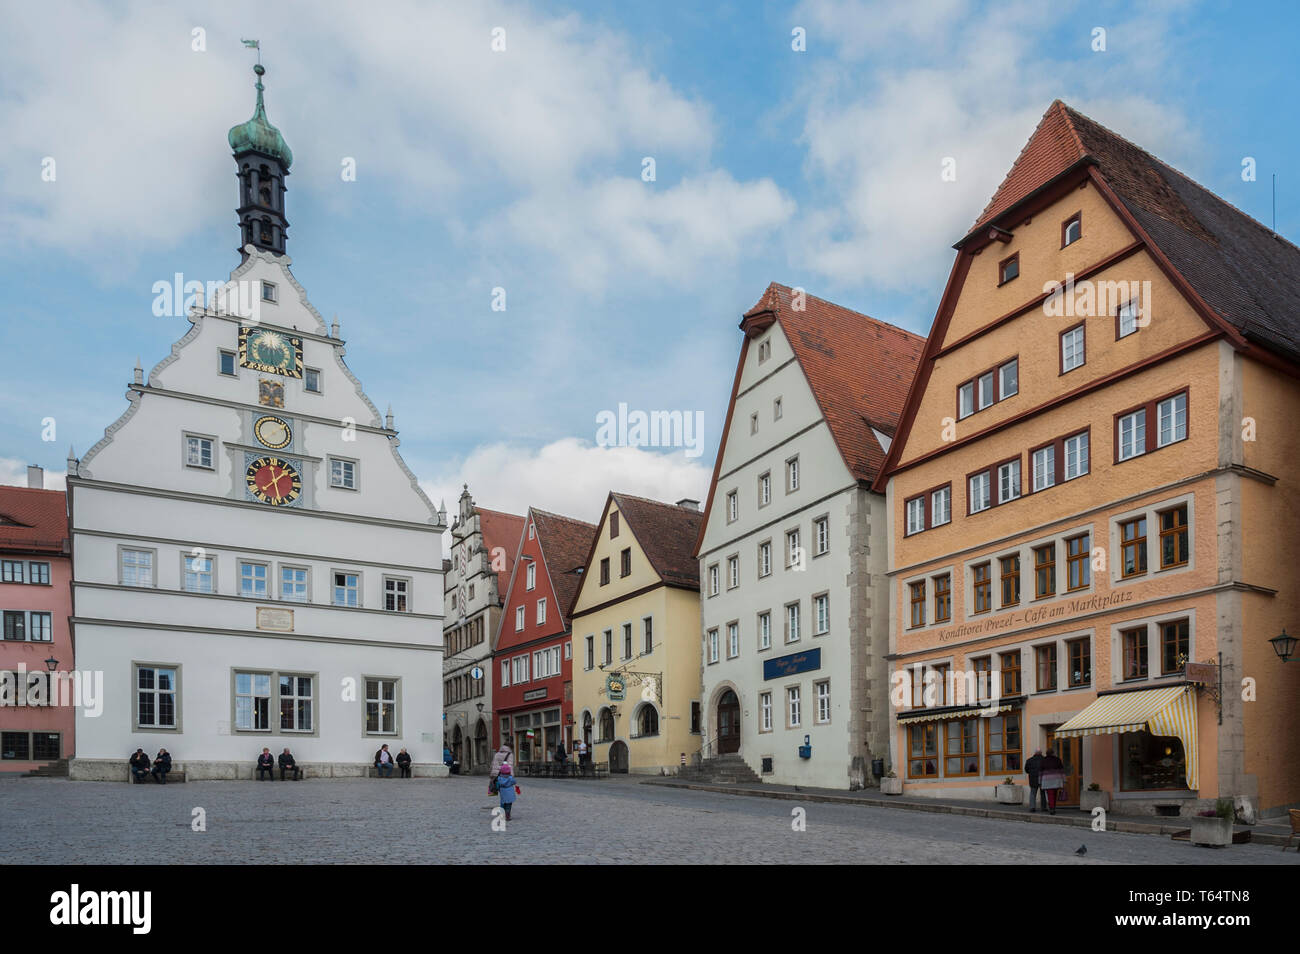 Town Hall (Rathaus) at Marktplatz - the main square of Rothenburg ob der  Tauber, one of the most beautiful and romantic villages in Germany - Europe  Stock Photo - Alamy